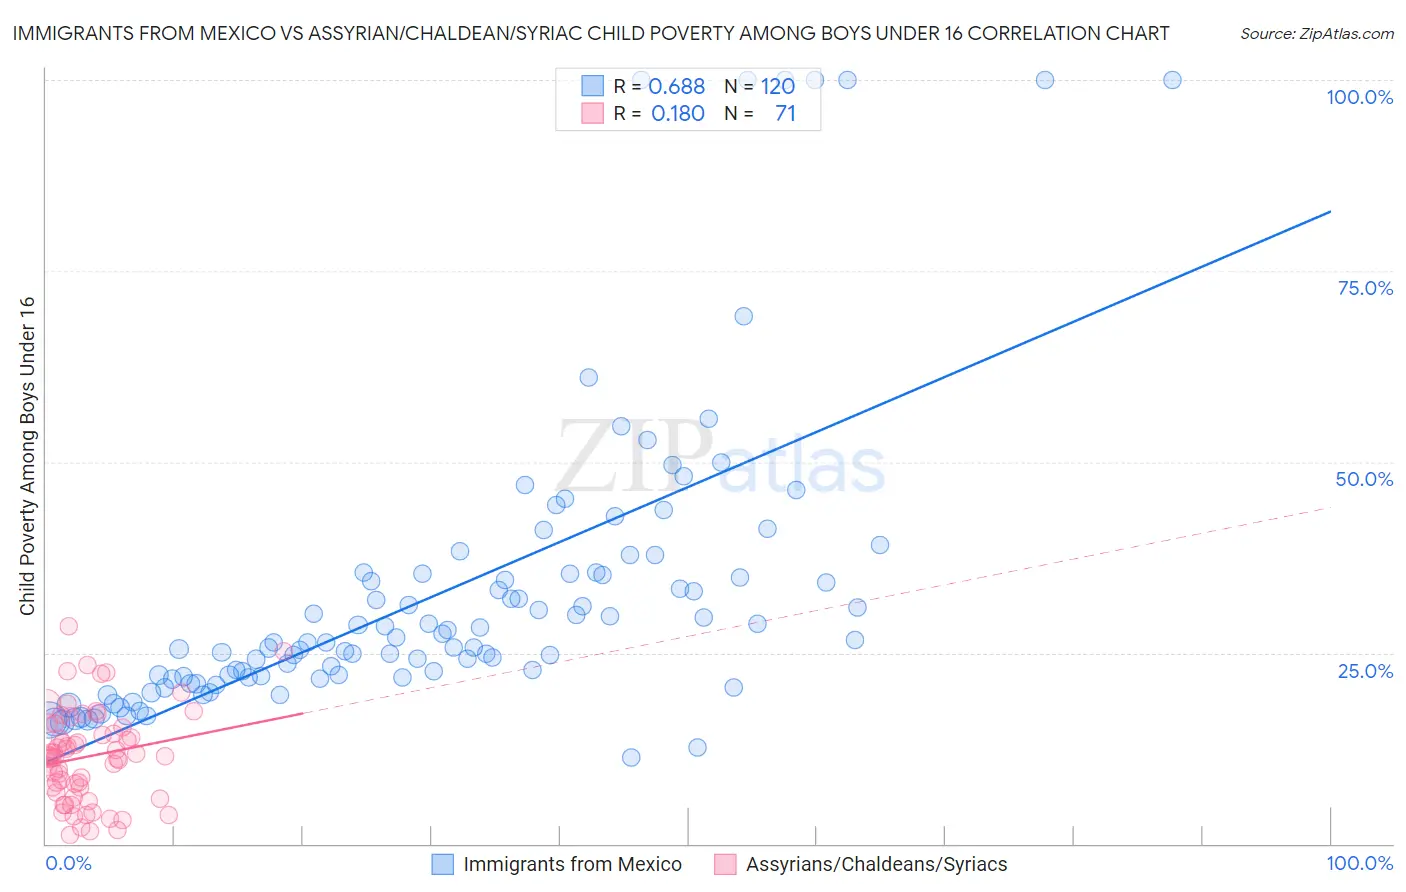 Immigrants from Mexico vs Assyrian/Chaldean/Syriac Child Poverty Among Boys Under 16